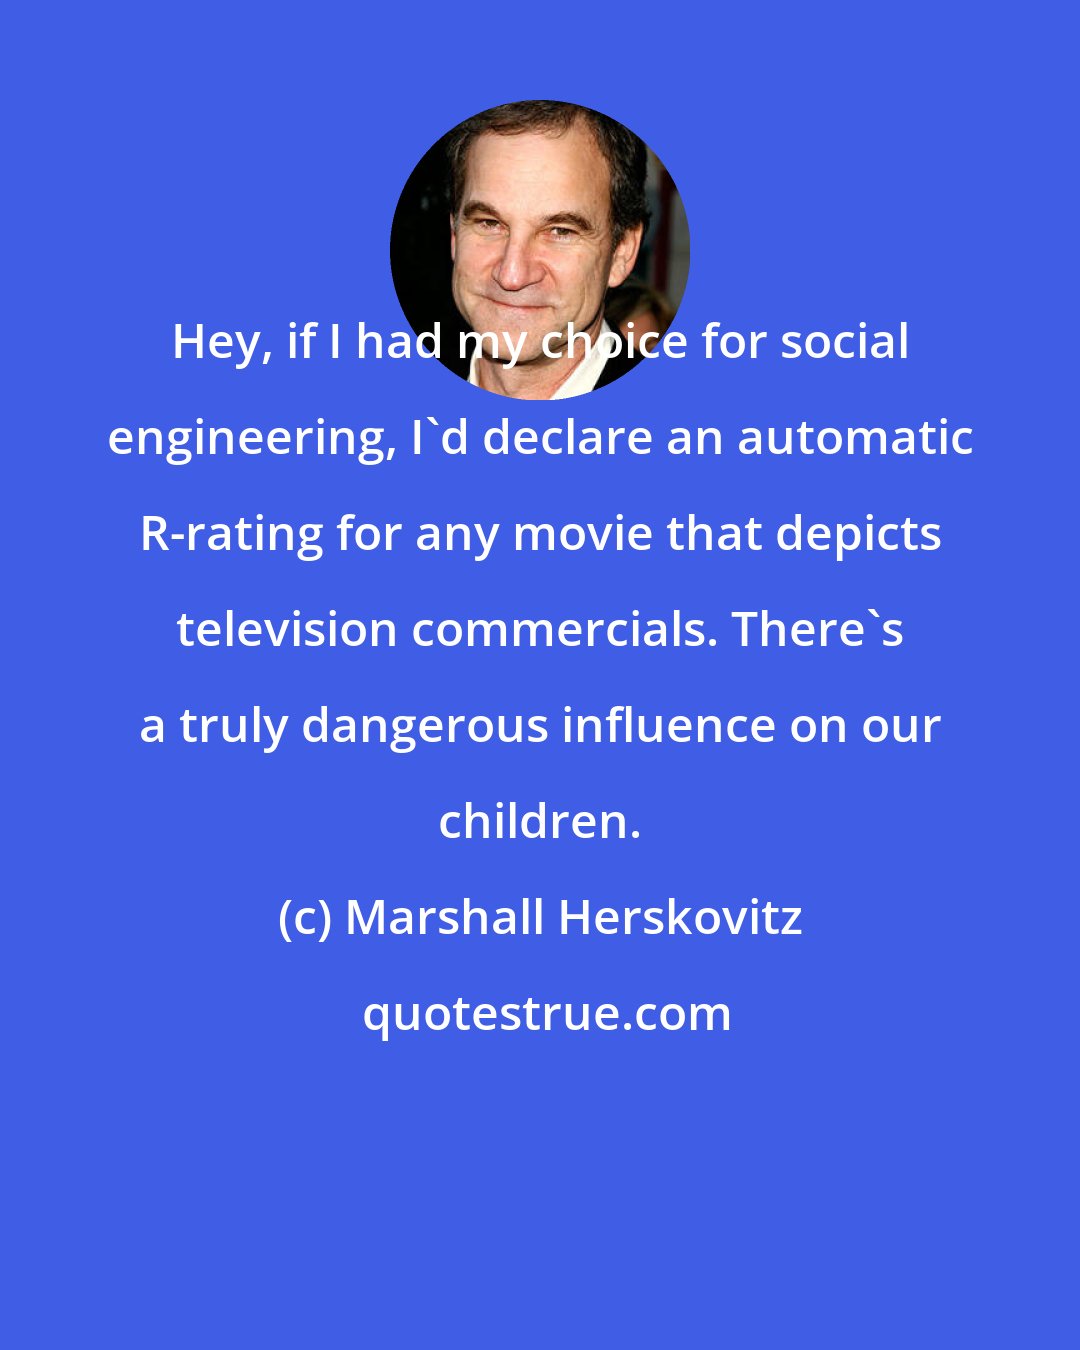 Marshall Herskovitz: Hey, if I had my choice for social engineering, I'd declare an automatic R-rating for any movie that depicts television commercials. There's a truly dangerous influence on our children.